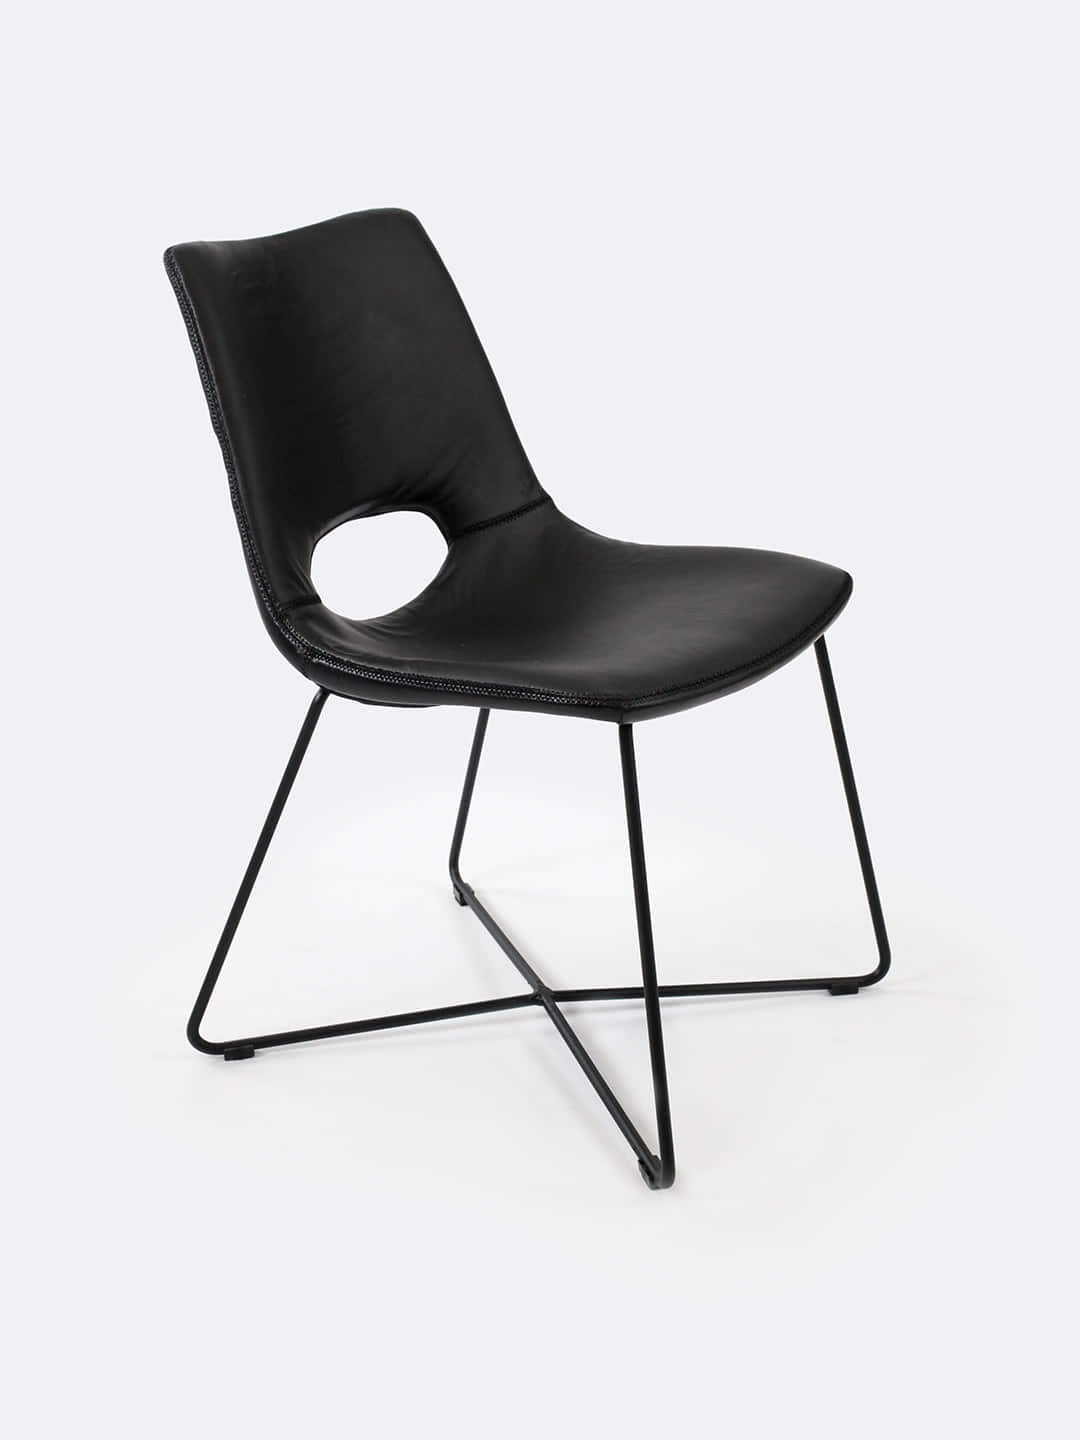 Baxter Dining Chair in Black